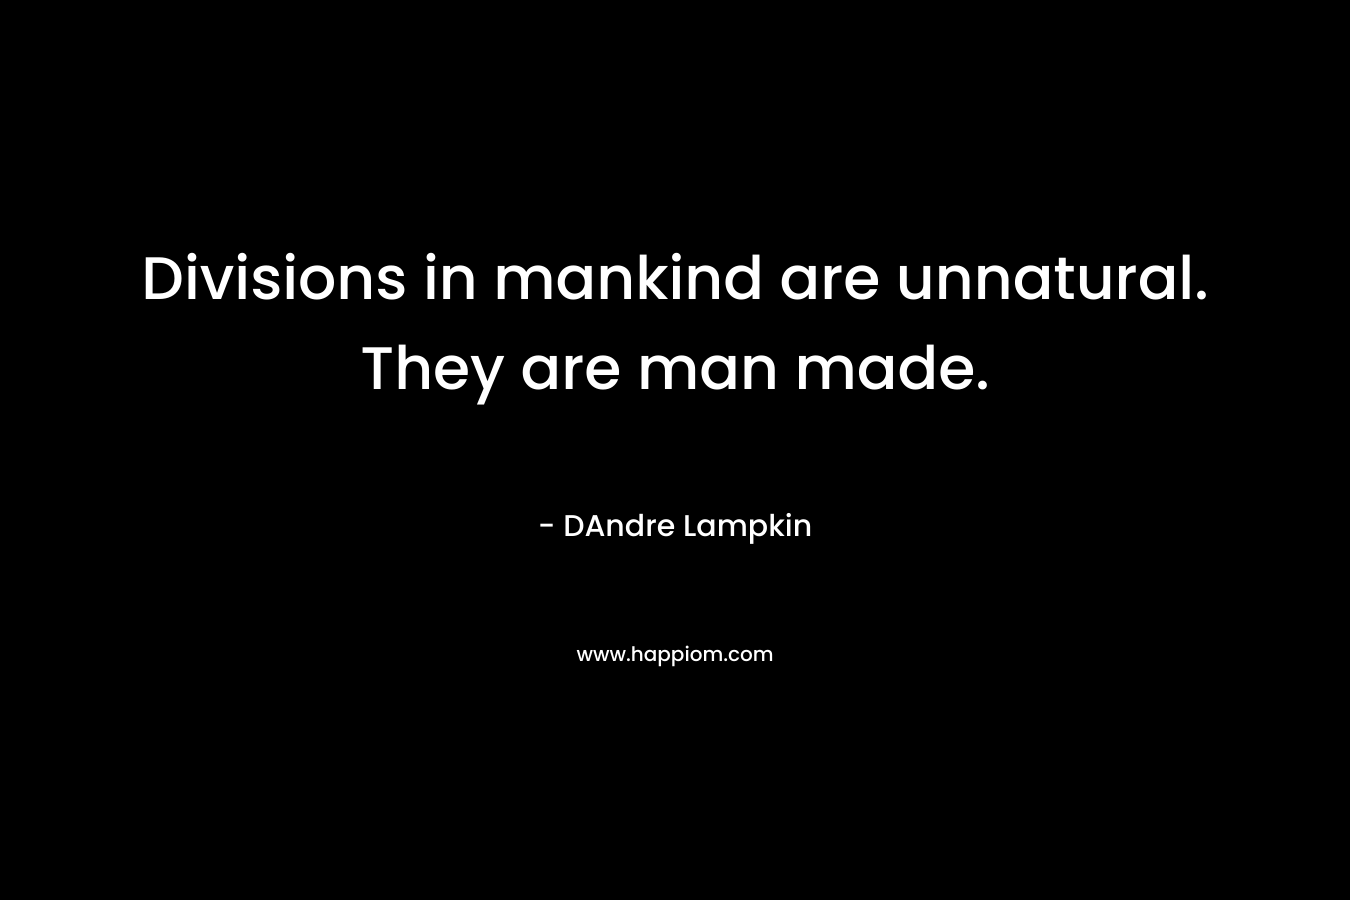 Divisions in mankind are unnatural. They are man made. – DAndre Lampkin